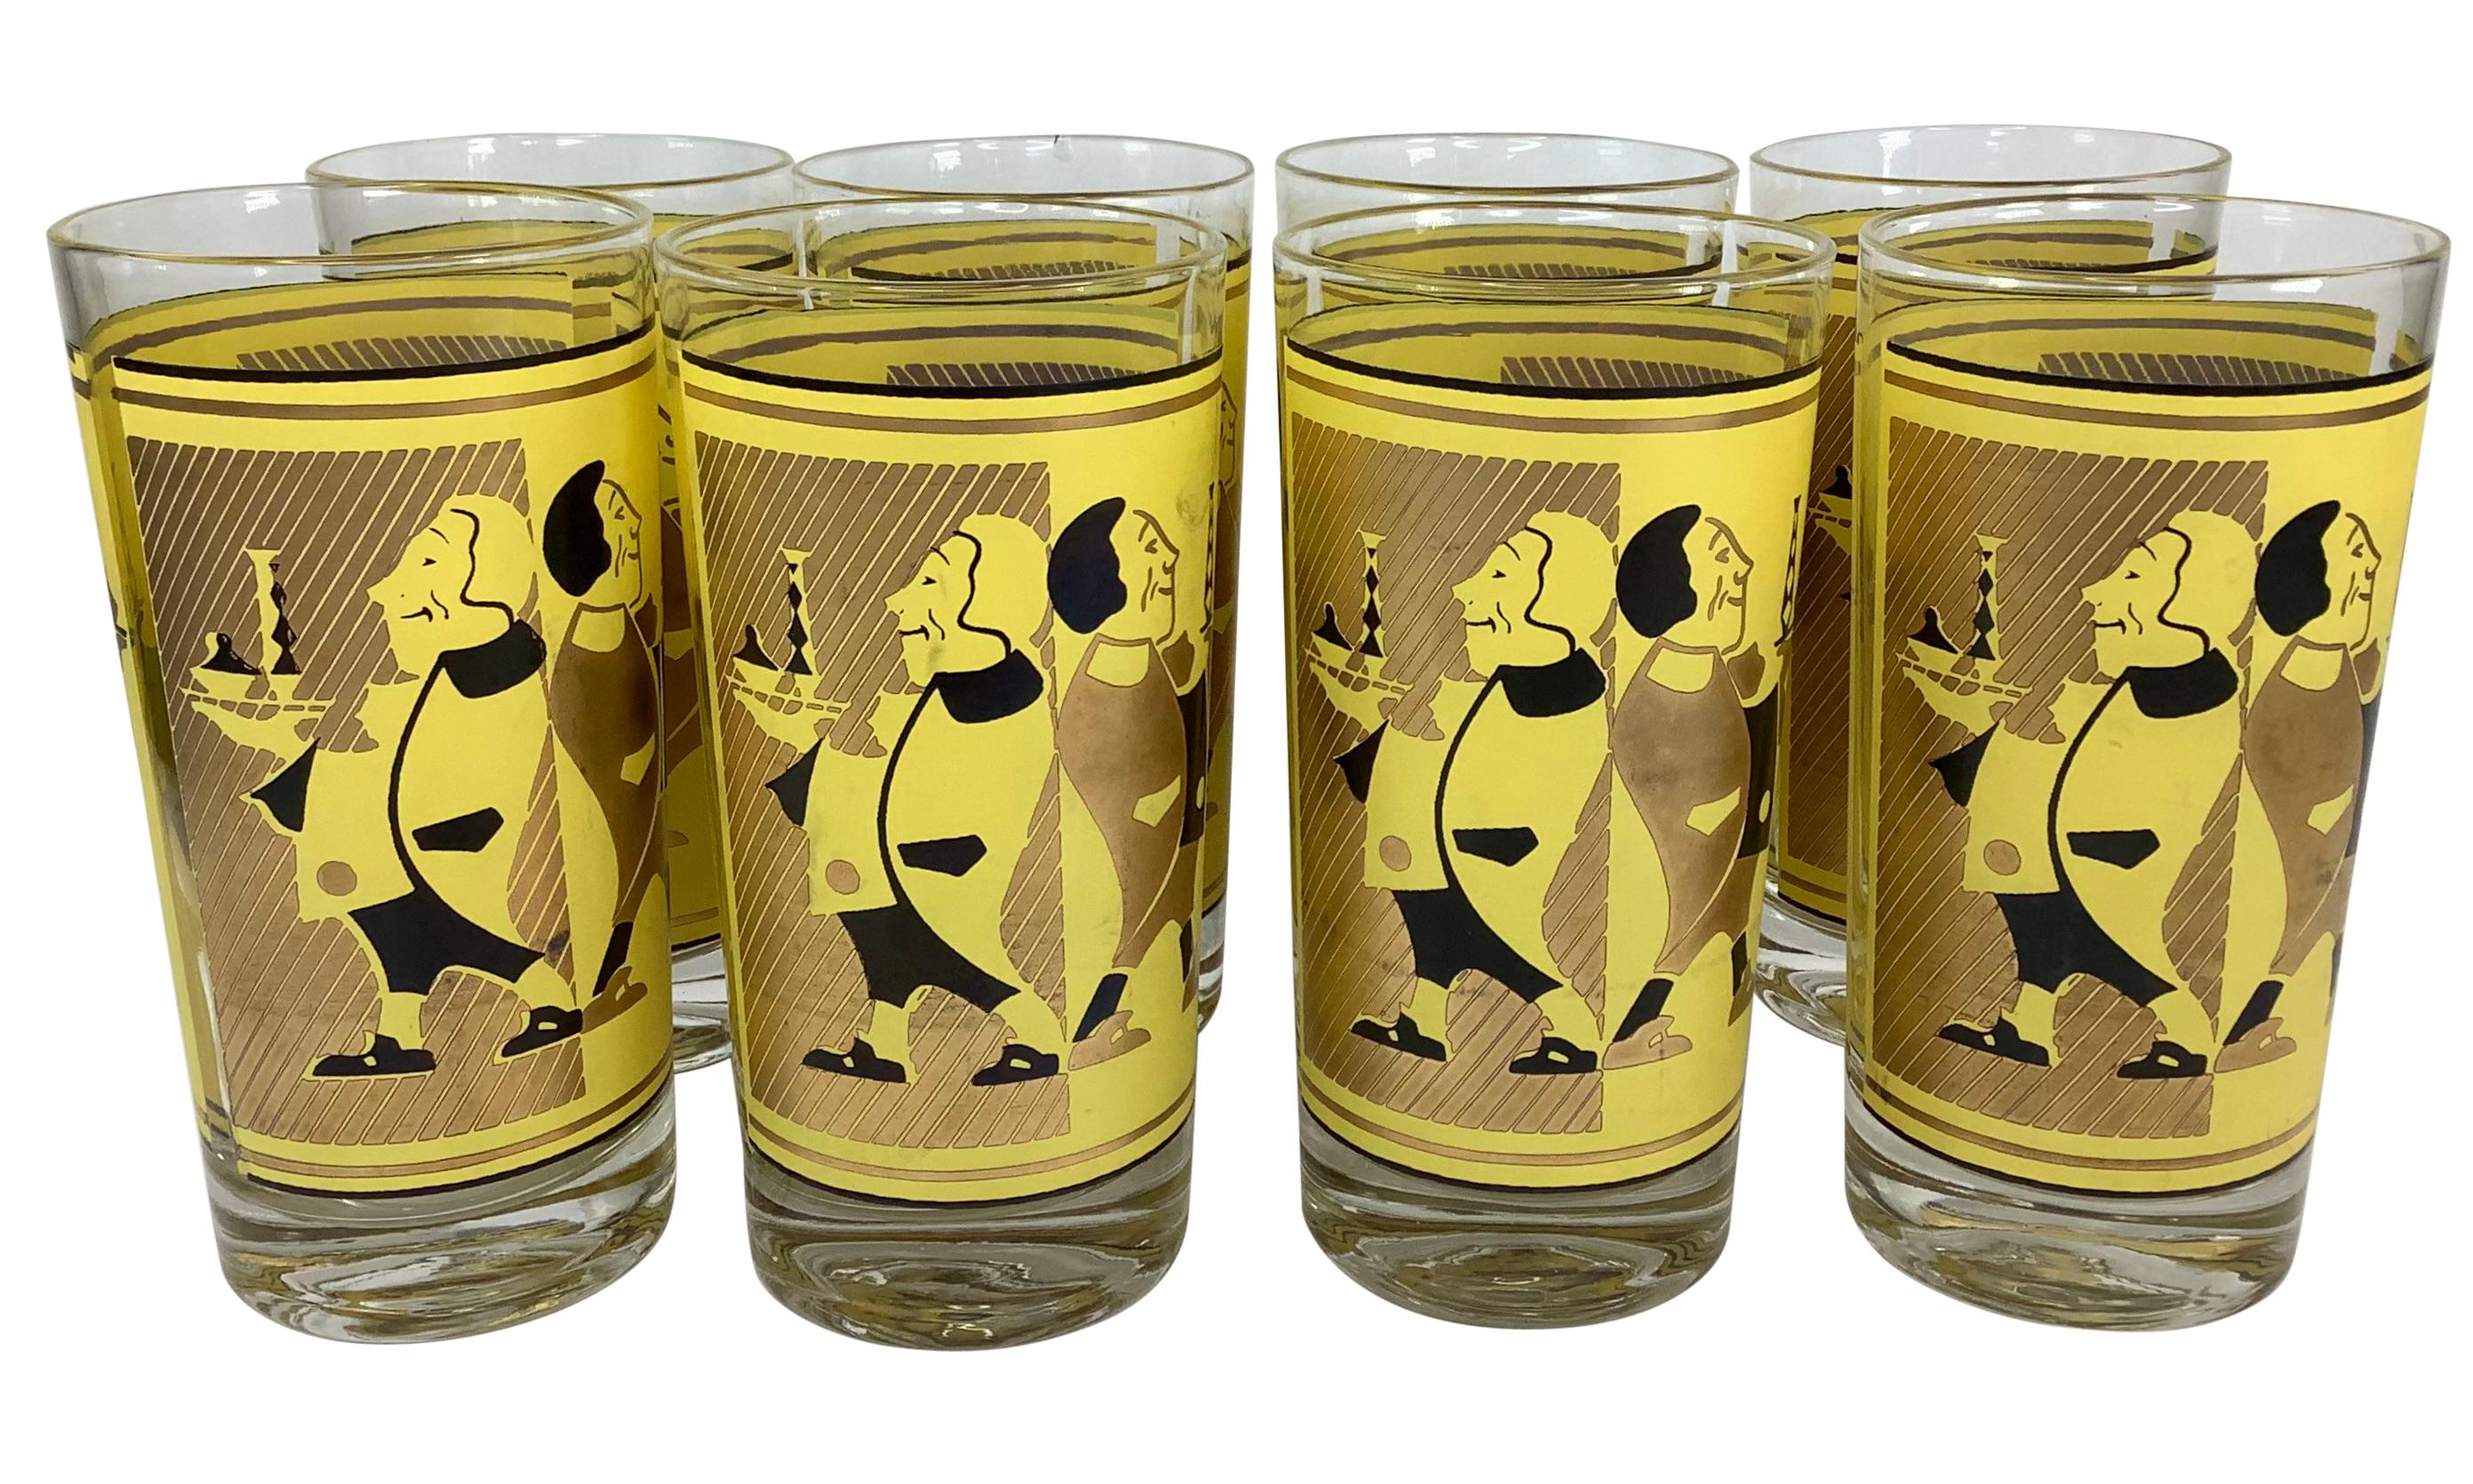 Set of 8 vintage whimsical highball glasses with waiters serving drinks dressed in yellow, gold and black outfits. Glasses are 5 1/2